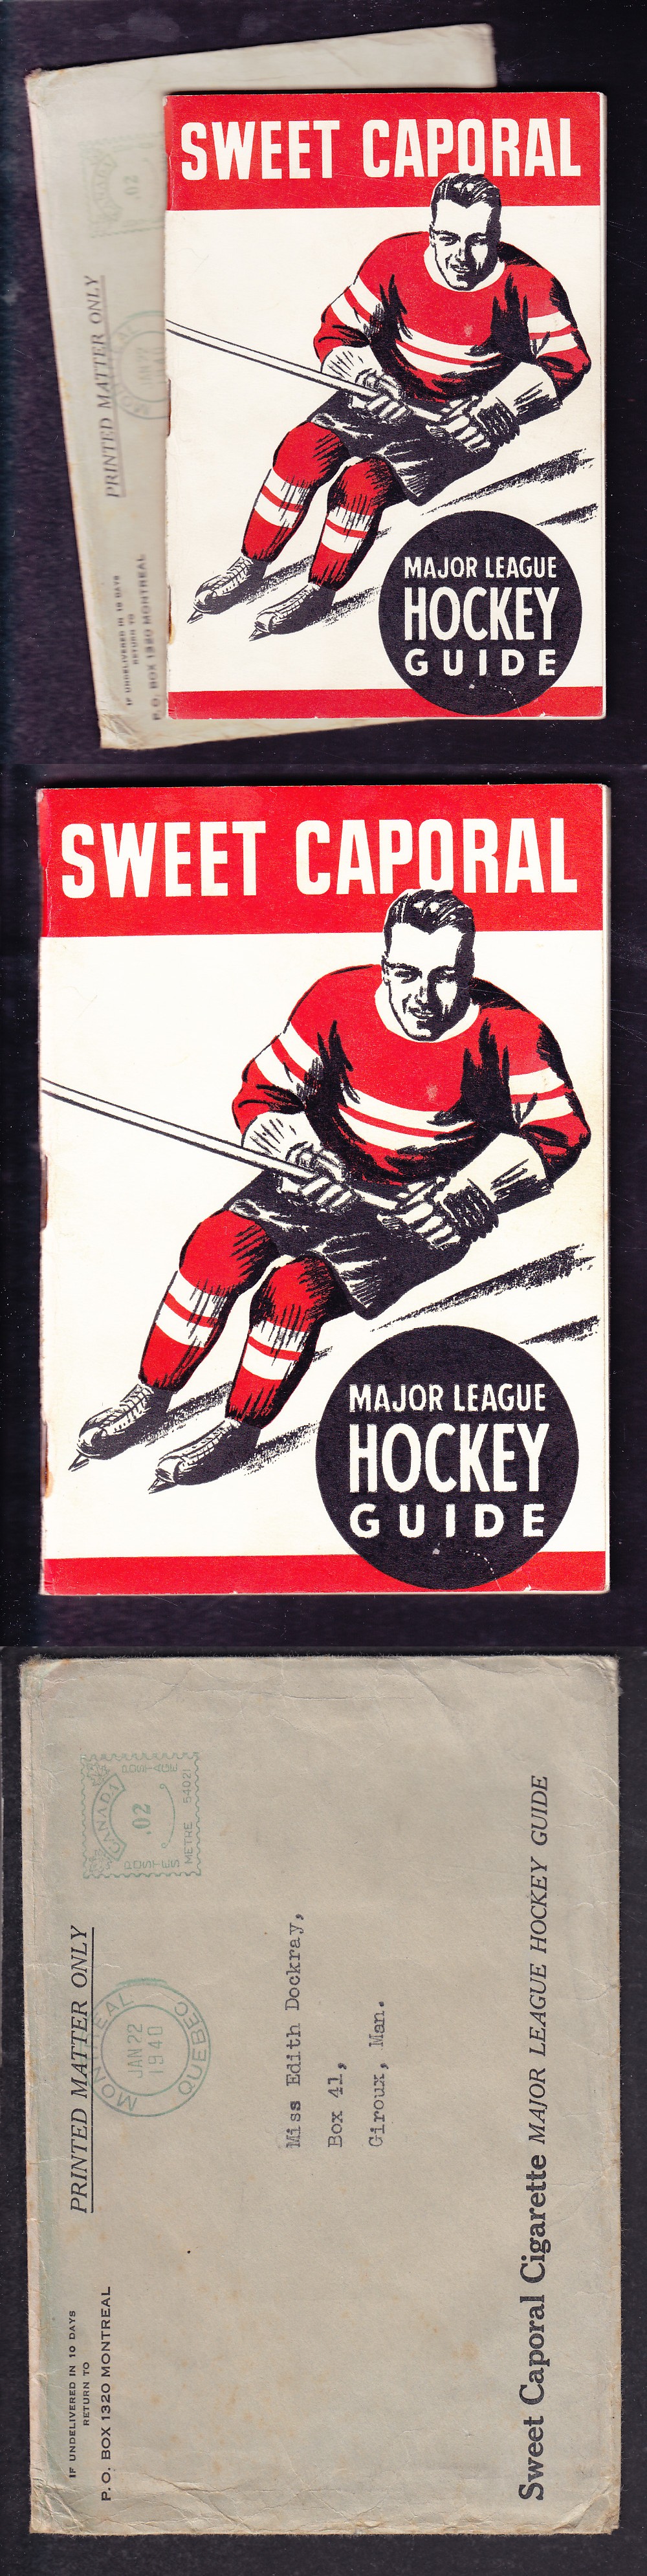 1939-40 SWEET CAPORAL NHL HOCKEY GUIDE WITH ORIGINAL SHIPPING ENVELOPE photo